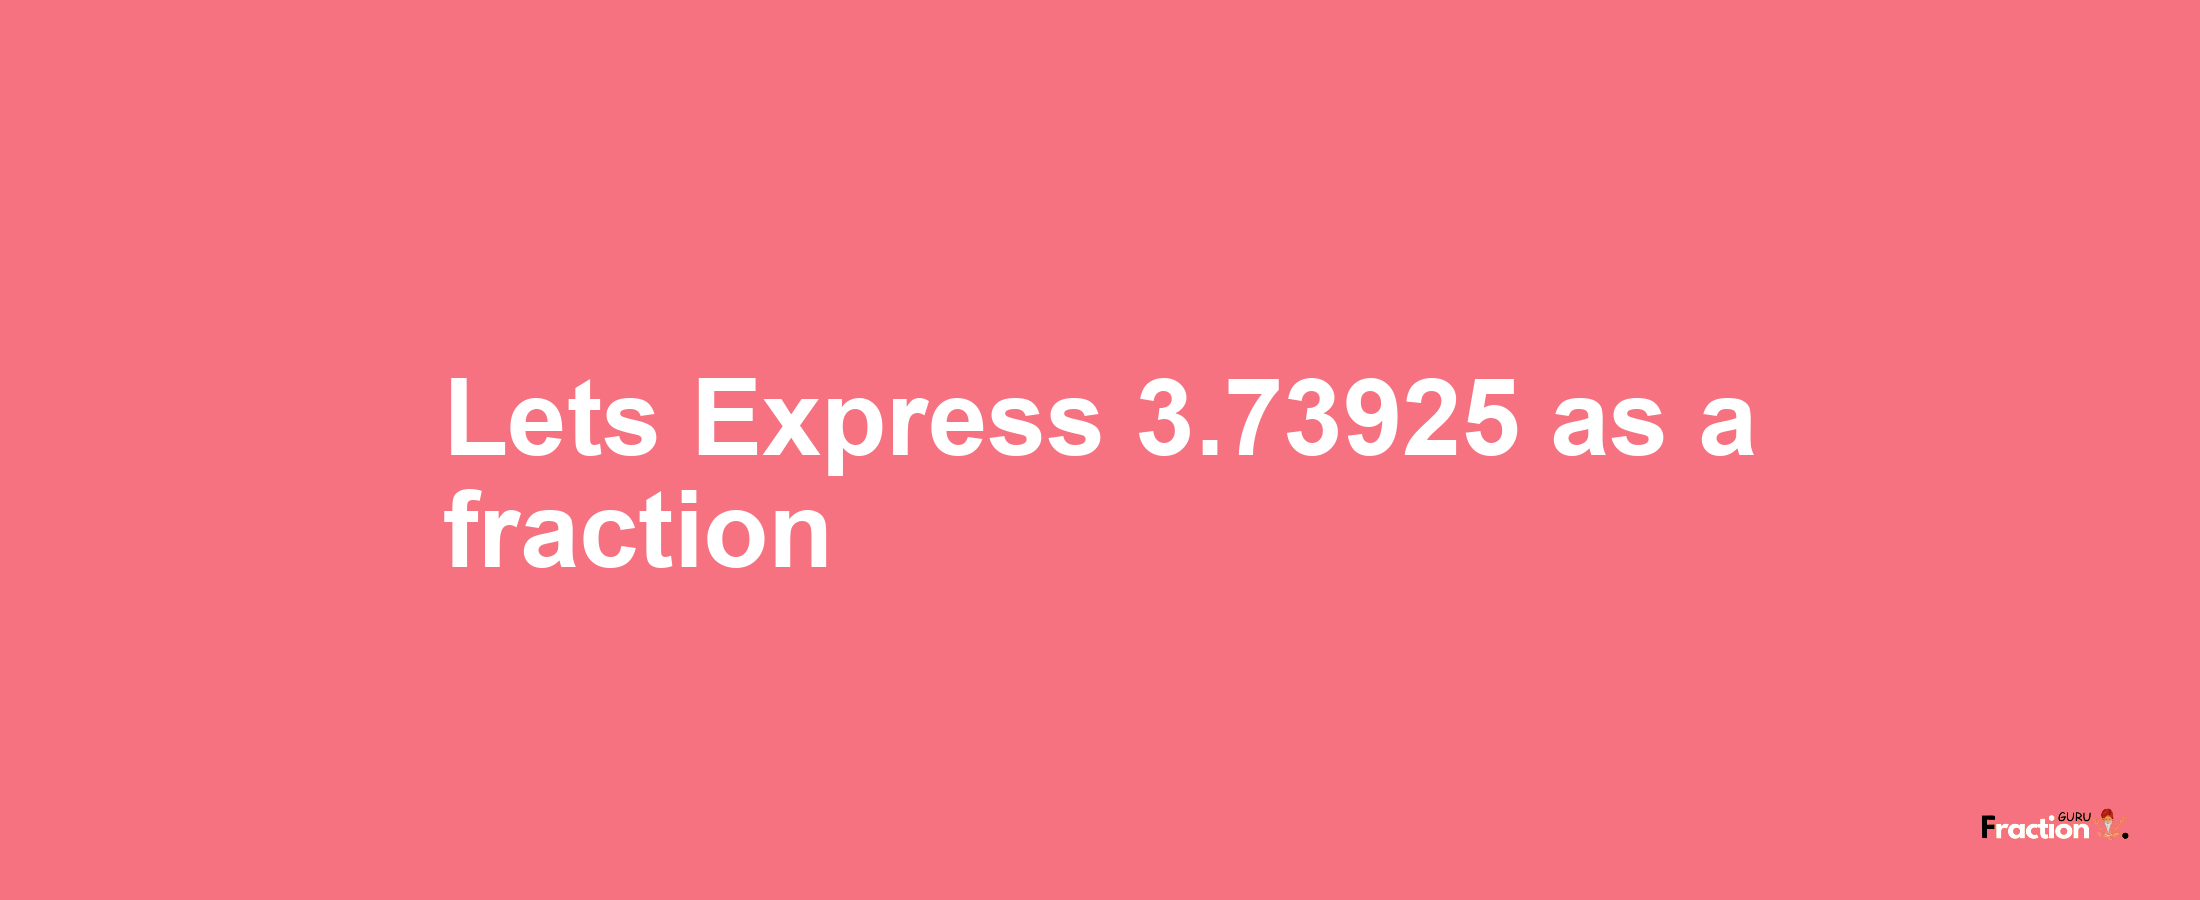 Lets Express 3.73925 as afraction